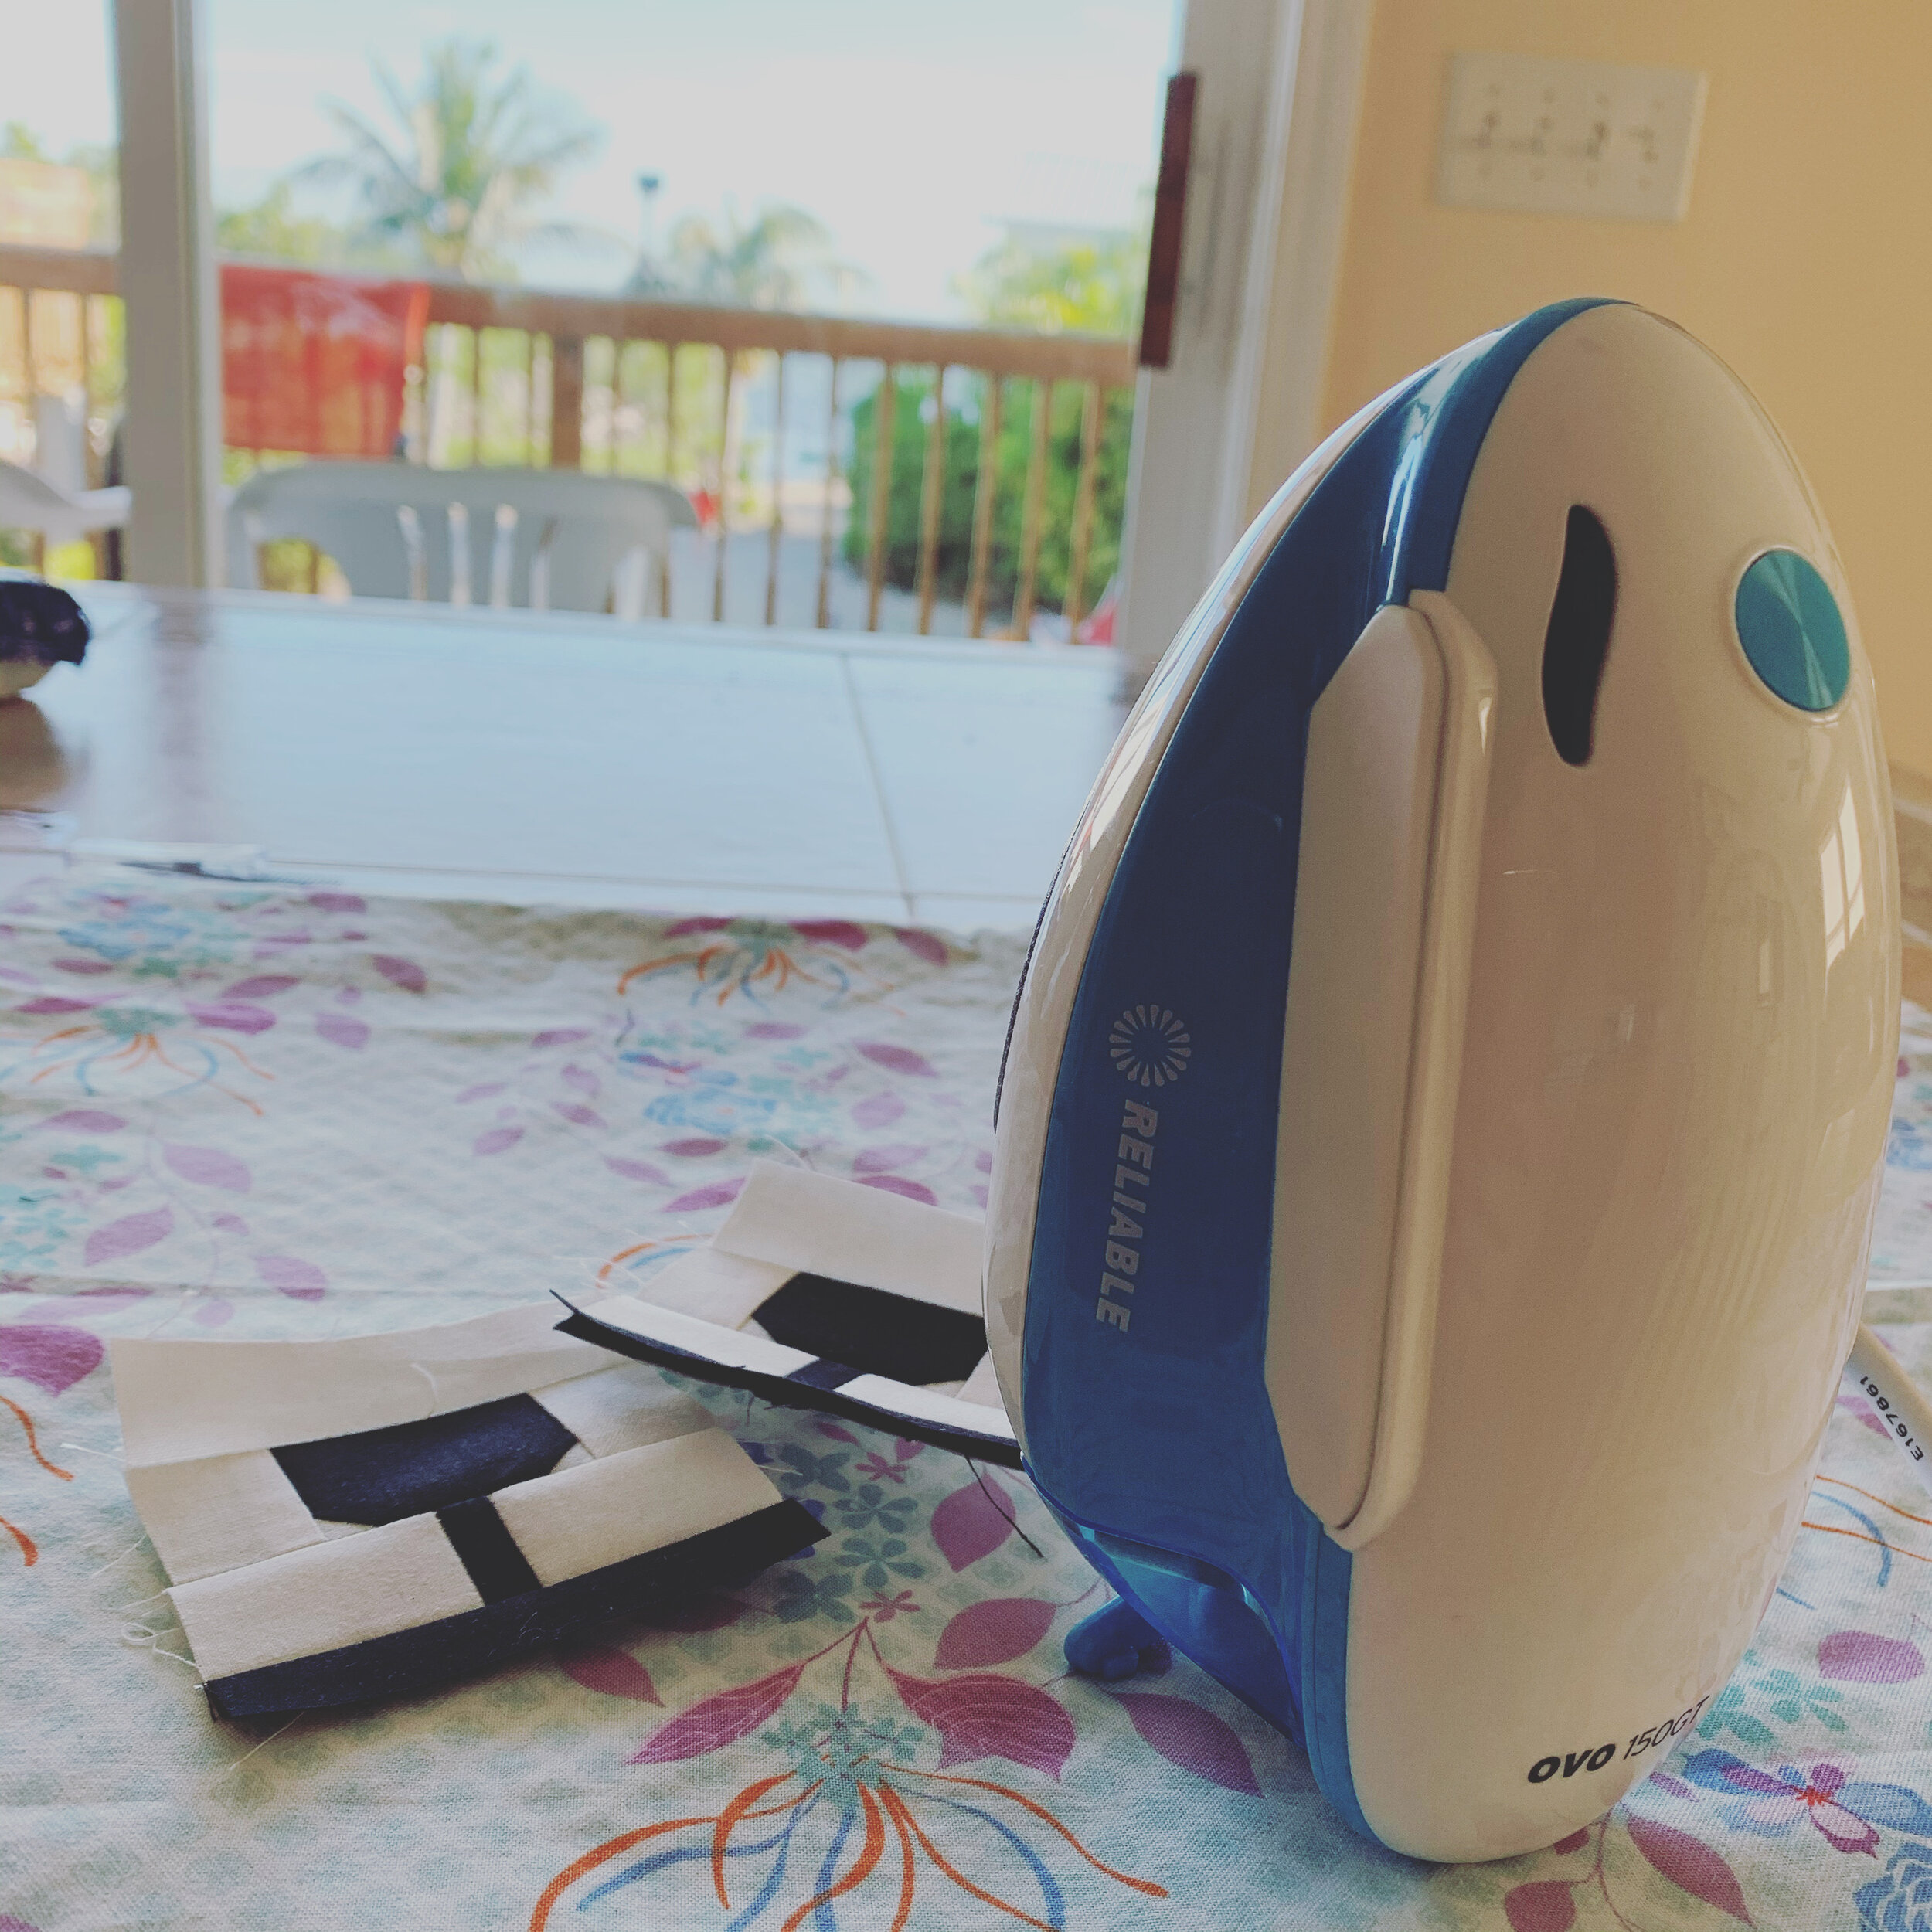 My Reliable OVO travel iron got lots of use!